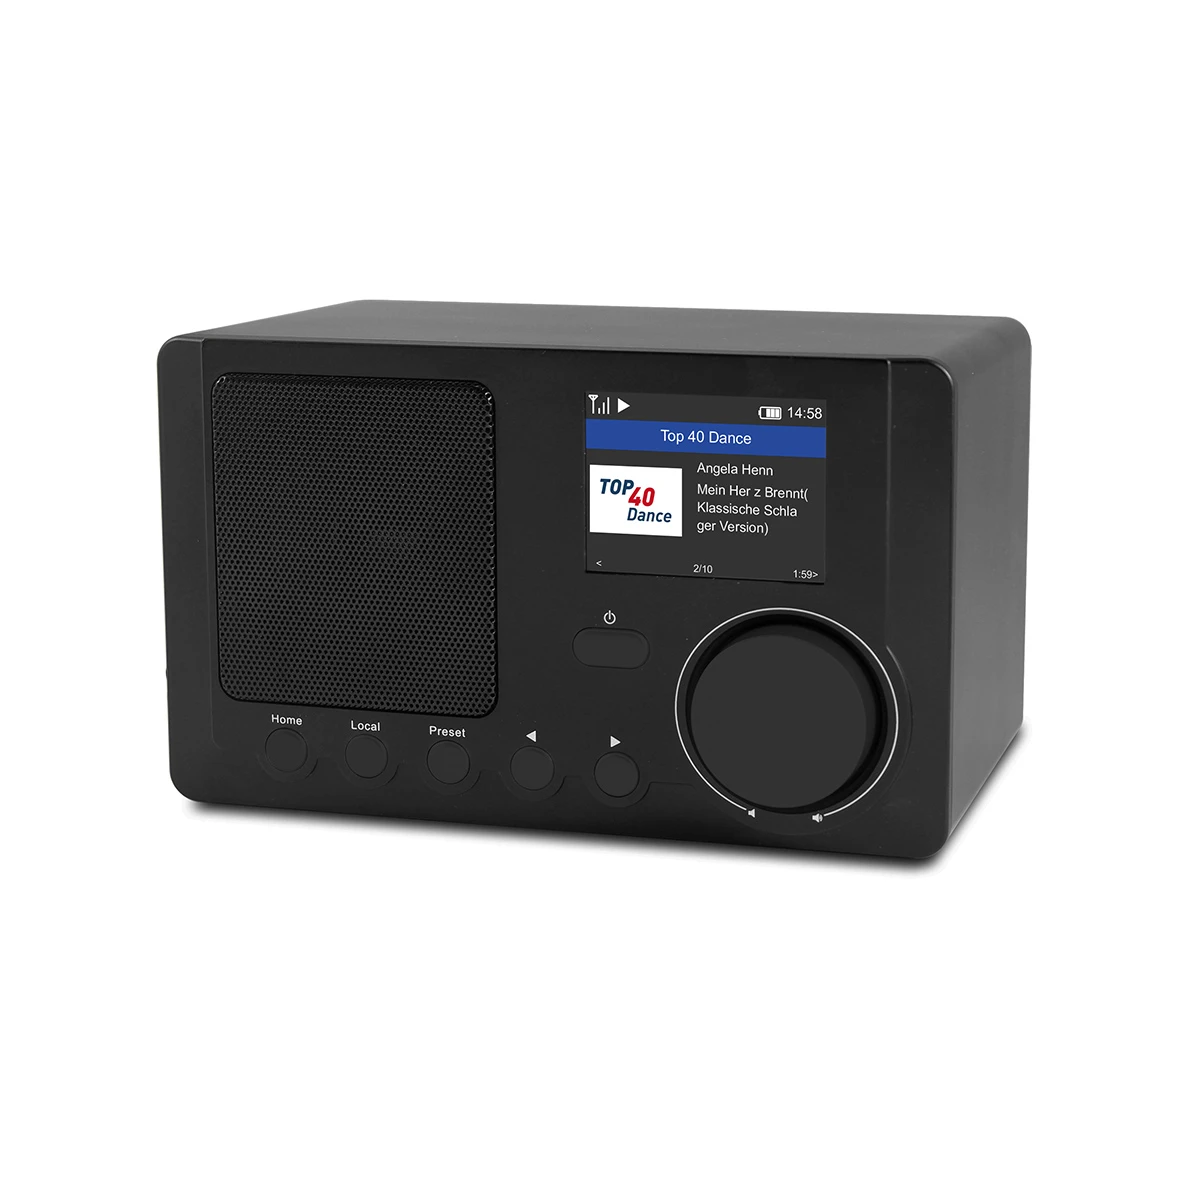 MA-210N Portable Internet Radio WiFi Receiver with Bluetooth 2000mAH Built-in Battery Rechargeable